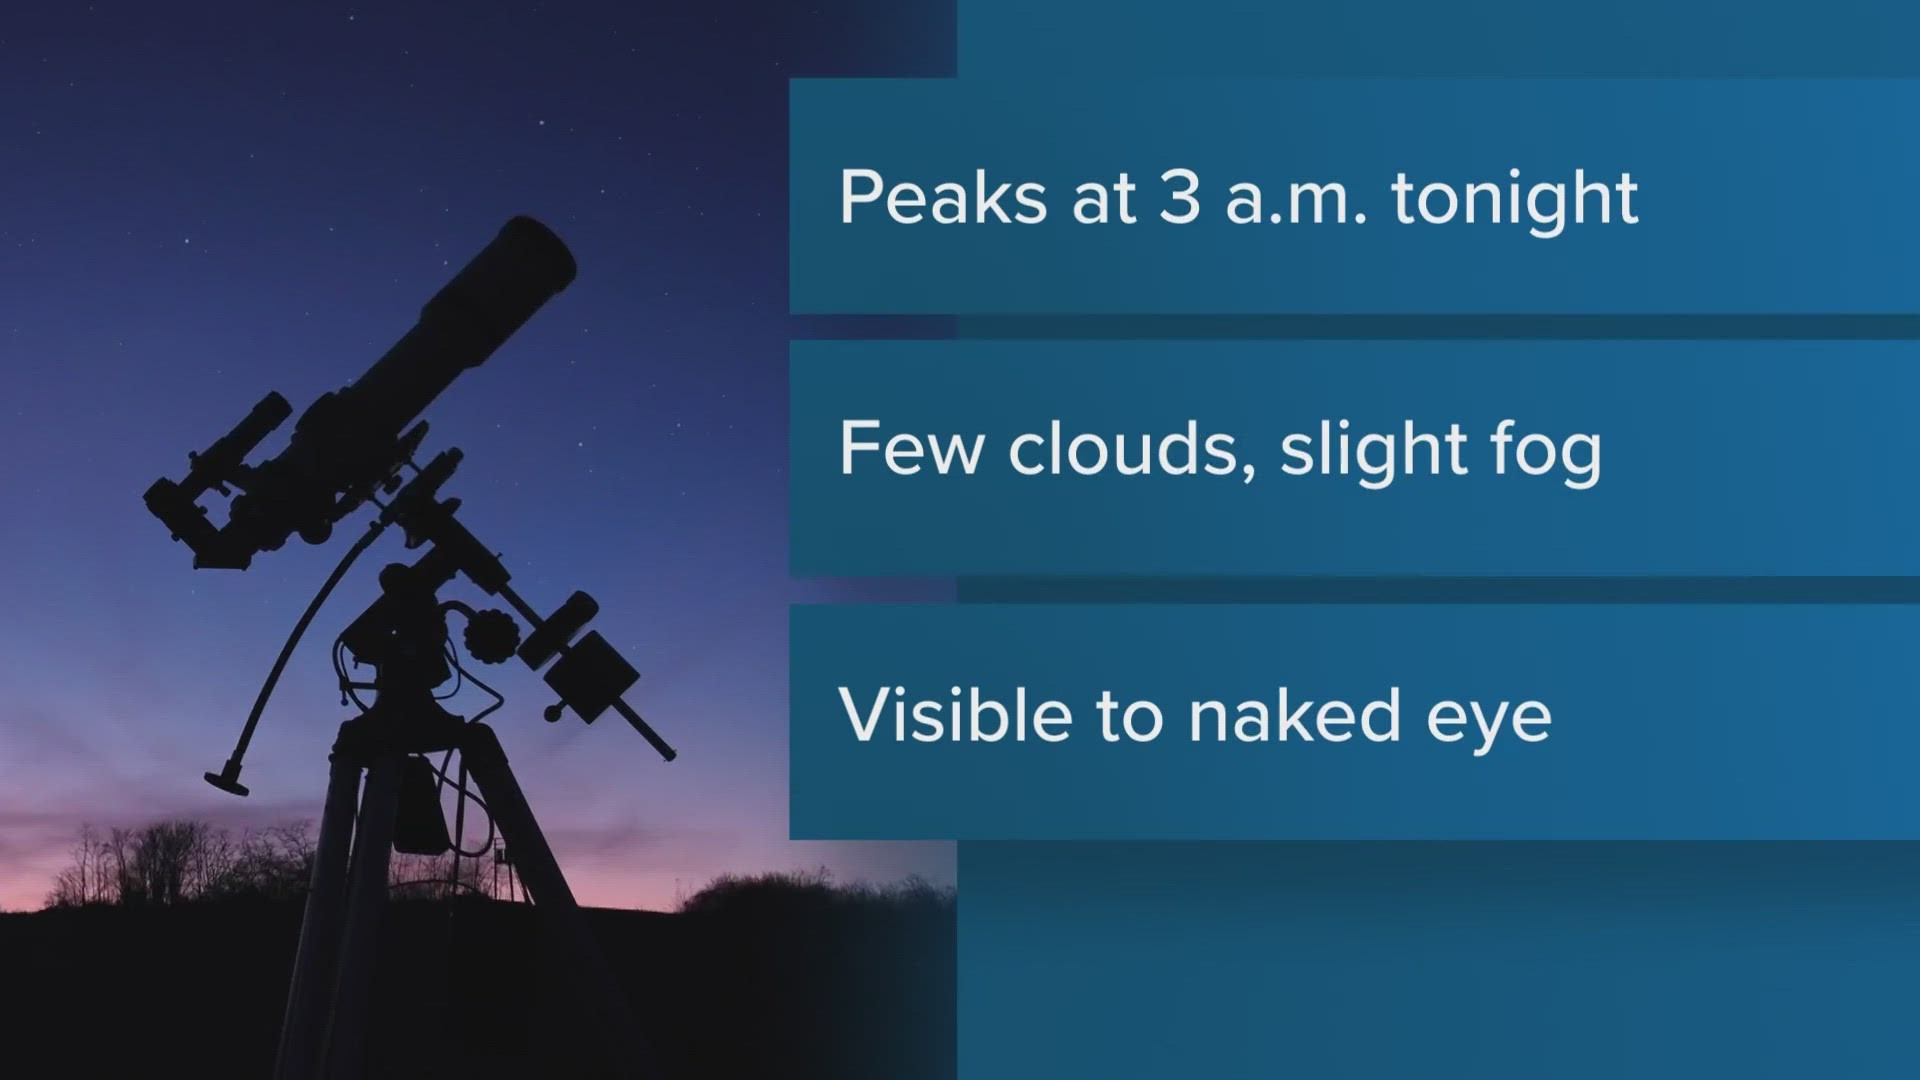 The Quadrantid meteor shower is forecasted to peak the night of Jan. 3. Here is how you can watch the astronomical event.